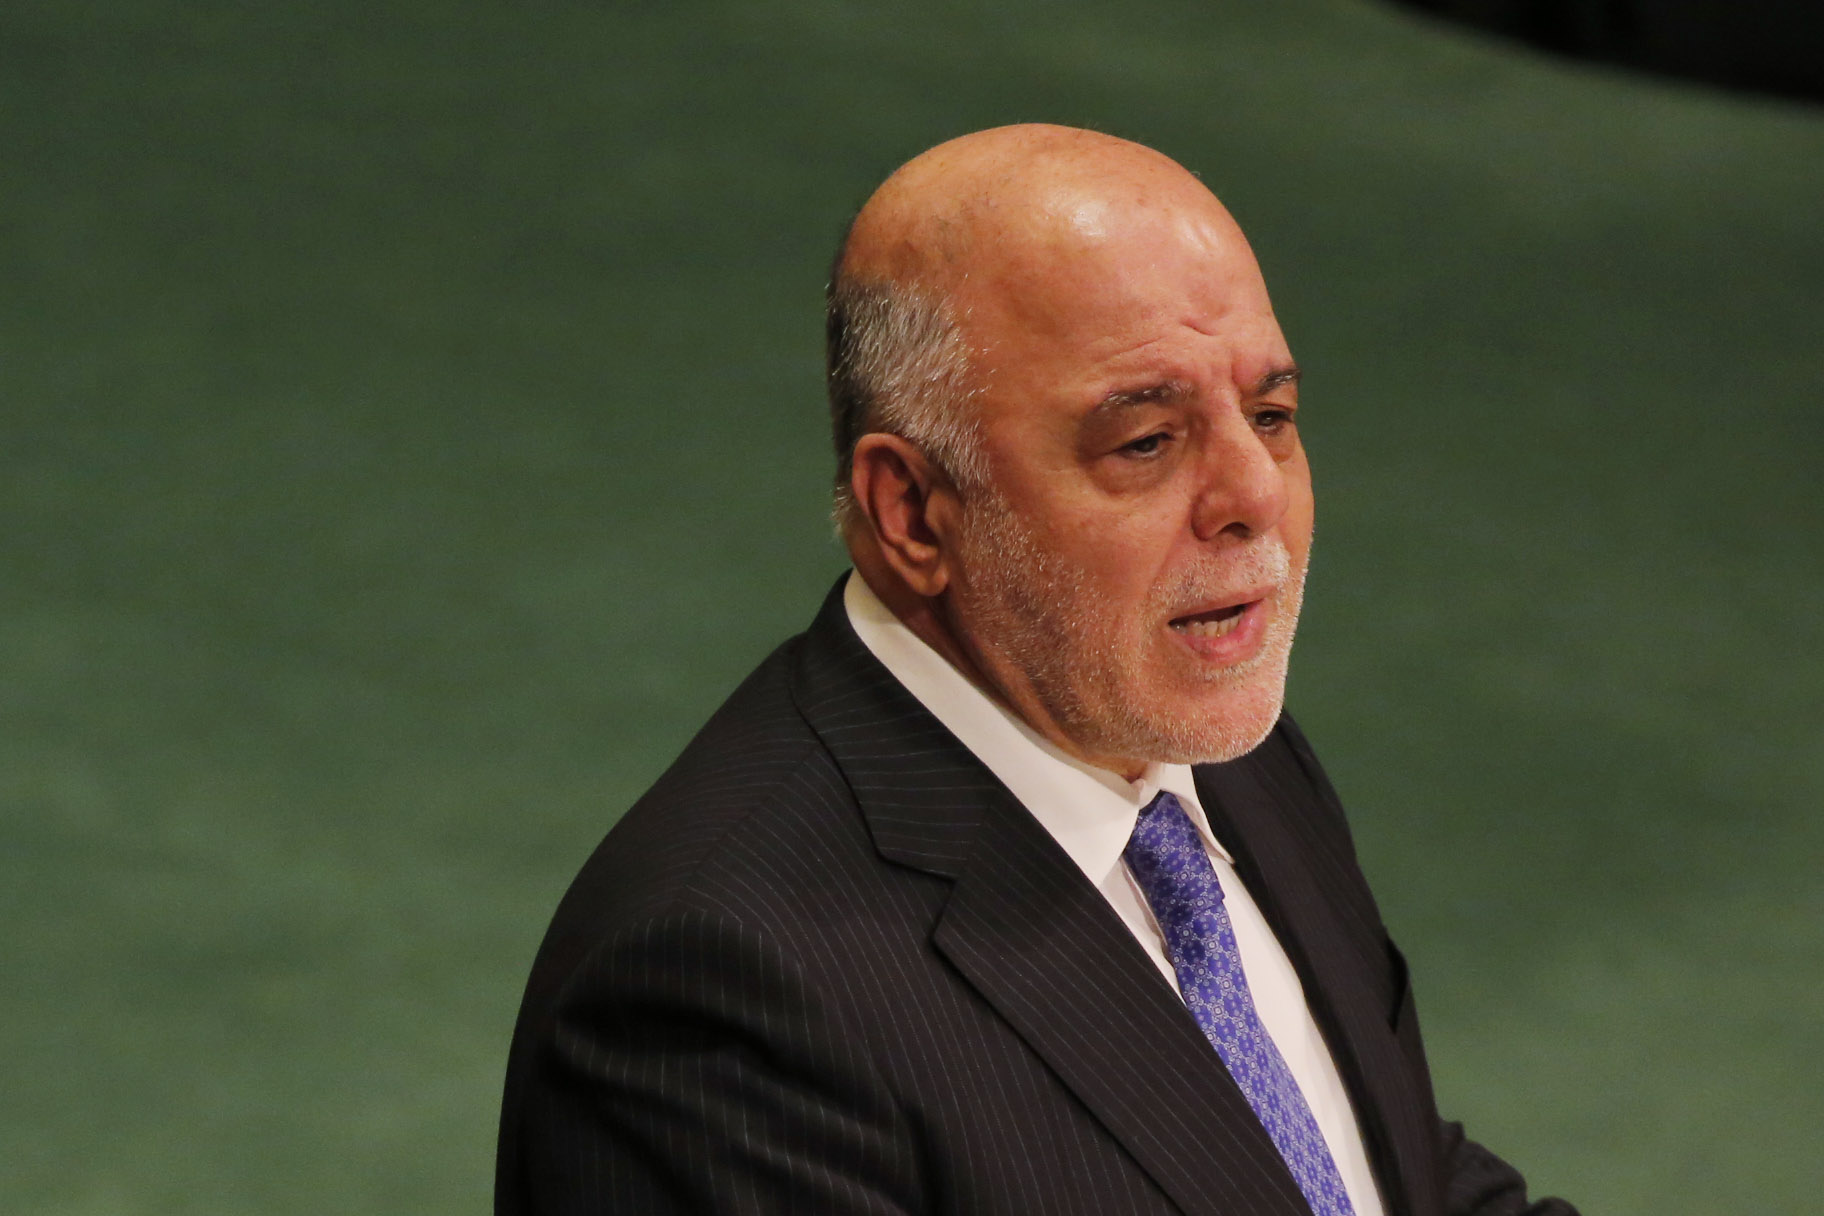 Haider al-Abadi, Prime Minister of Iraq addresses the 71st session of the United Nations General Assembly at the UN headquarters in New York on September 22, 2016. / AFP PHOTO / DOMINICK REUTER